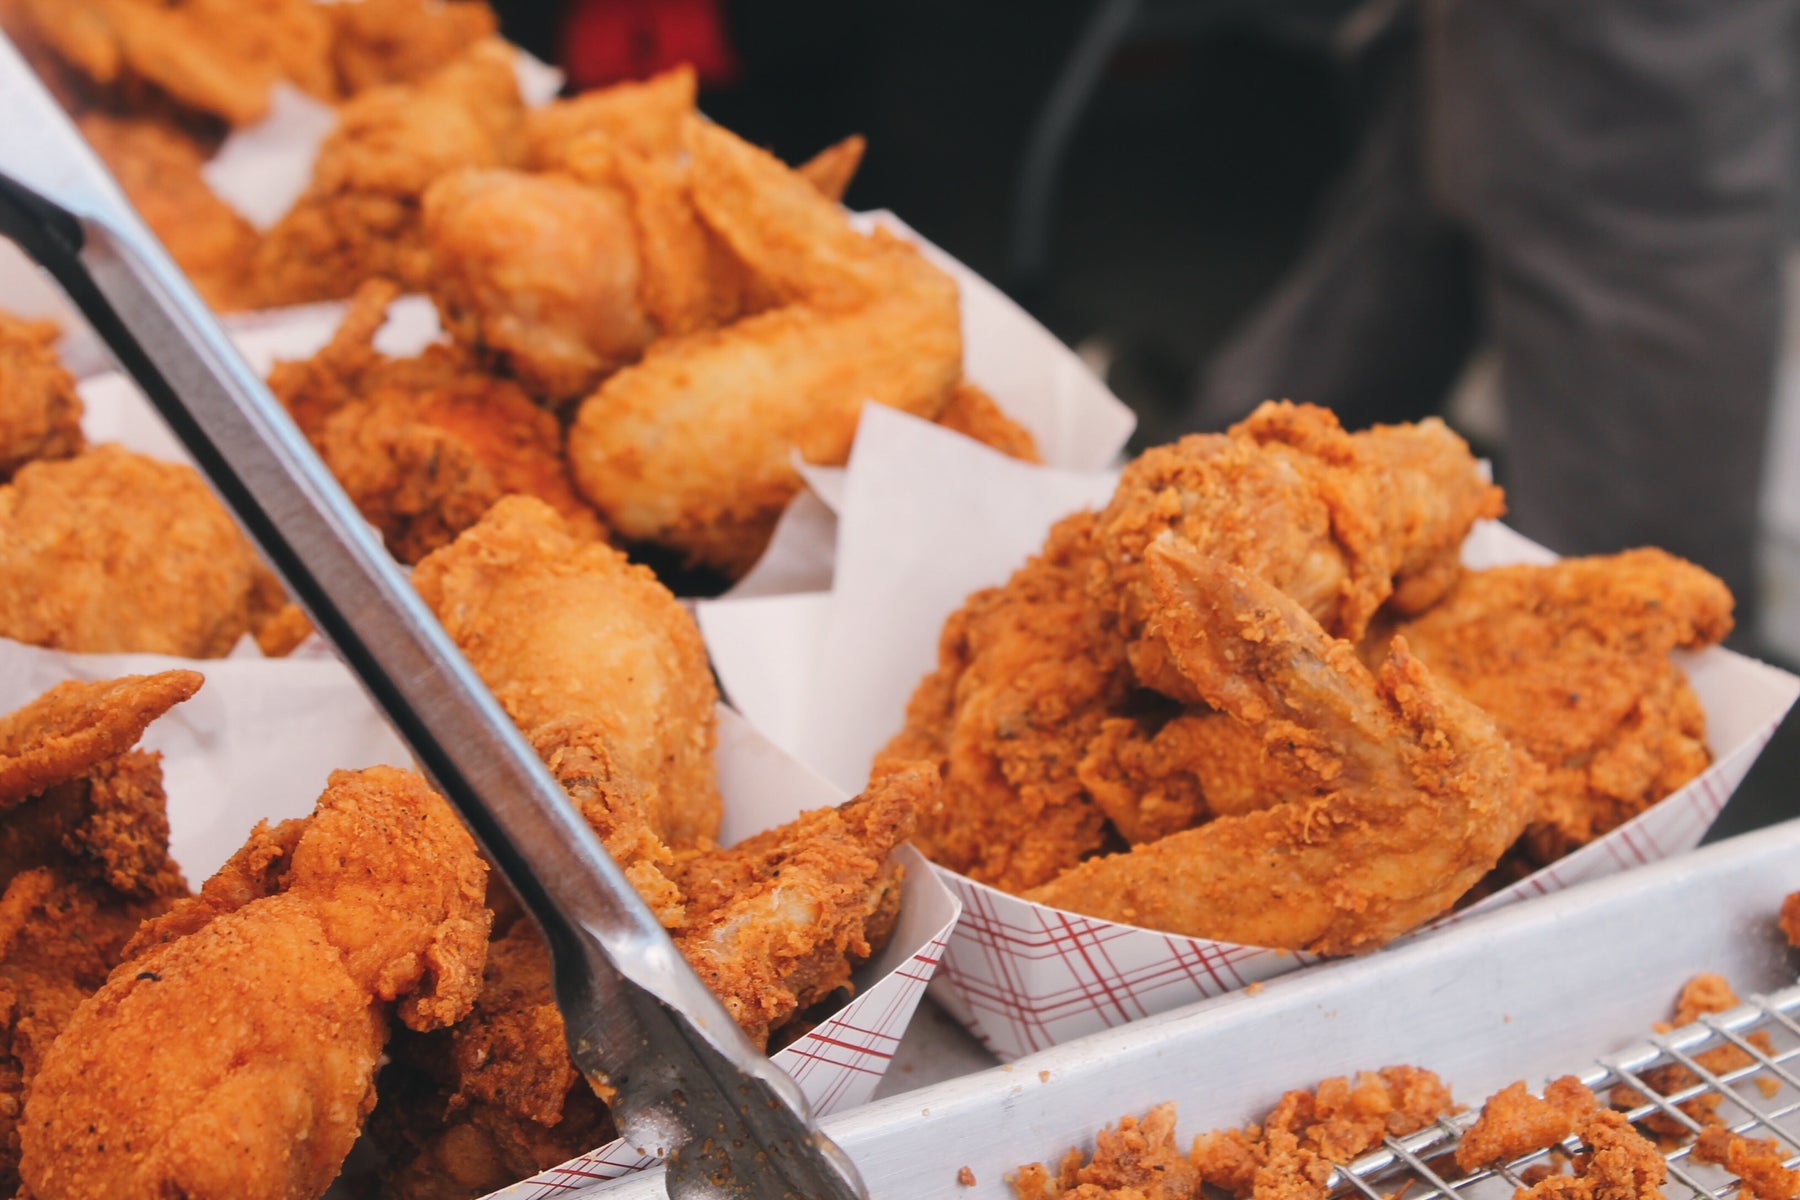 How to Choose the Best Commercial Chicken Fryer